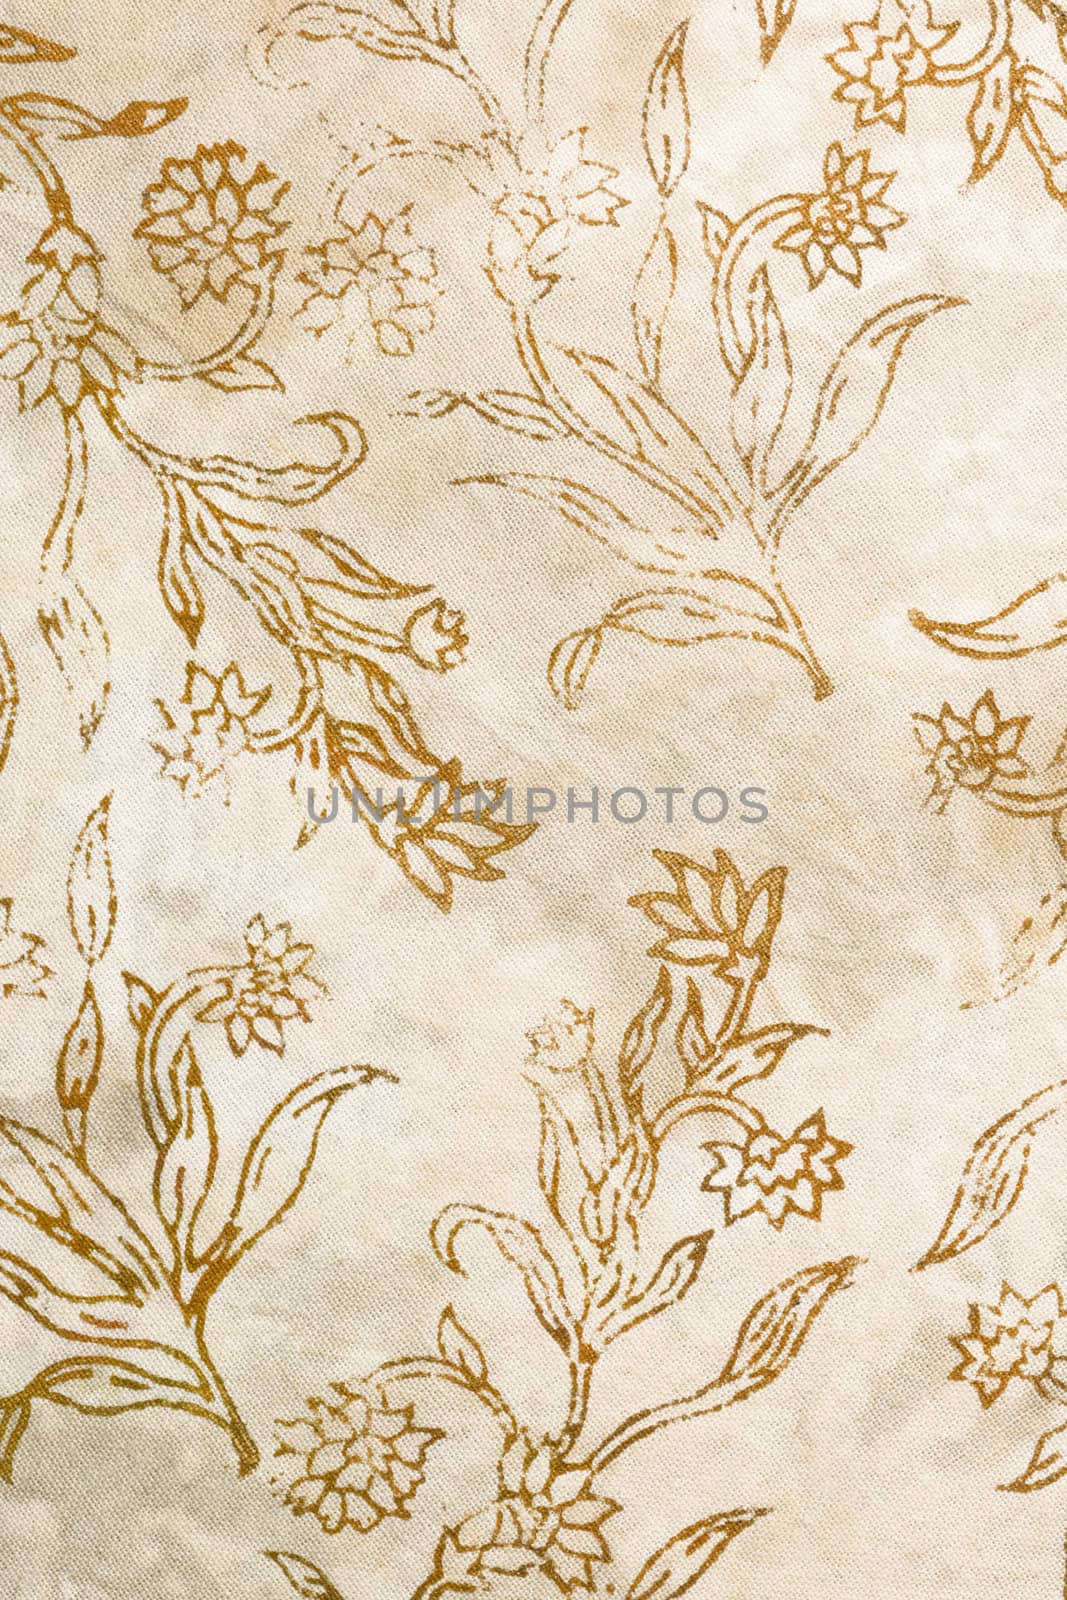 Silk batik with abstract flowers